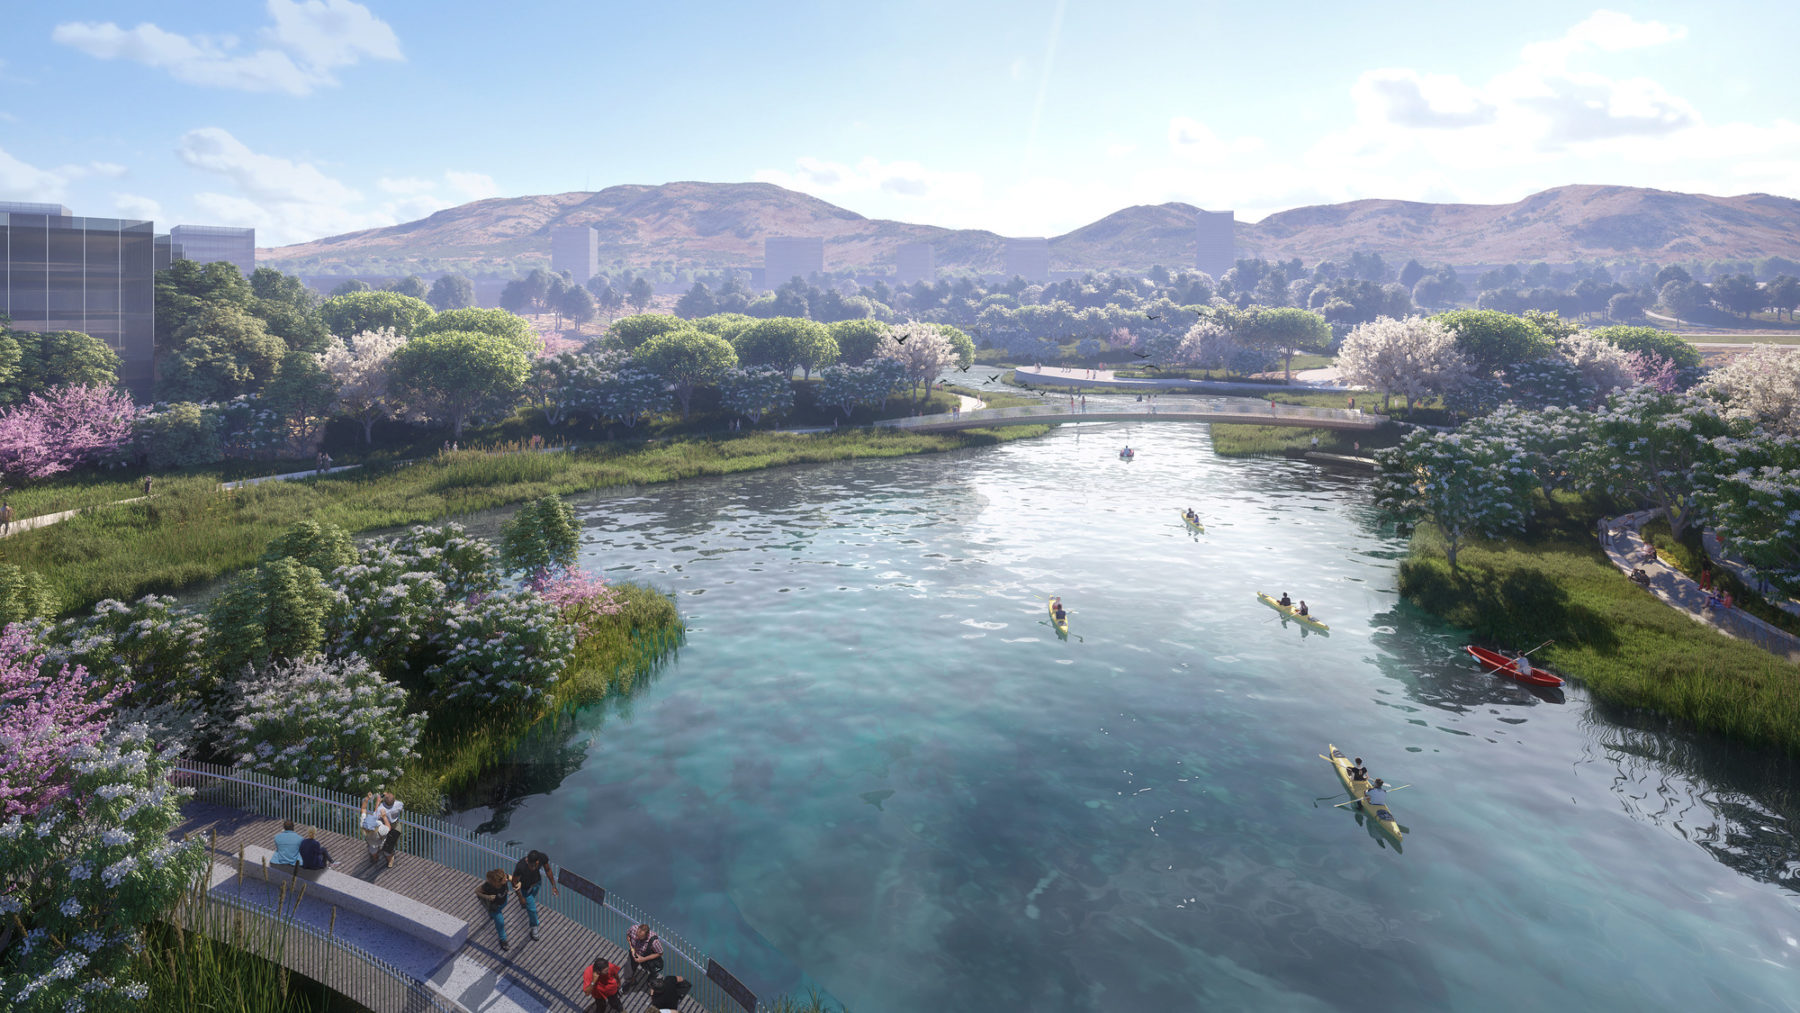 Rendering of lake on site. In the bottom left corner people walk and sit along a pedestrian and in the center of the frame a series of 1-2 person kayaks are on the water.